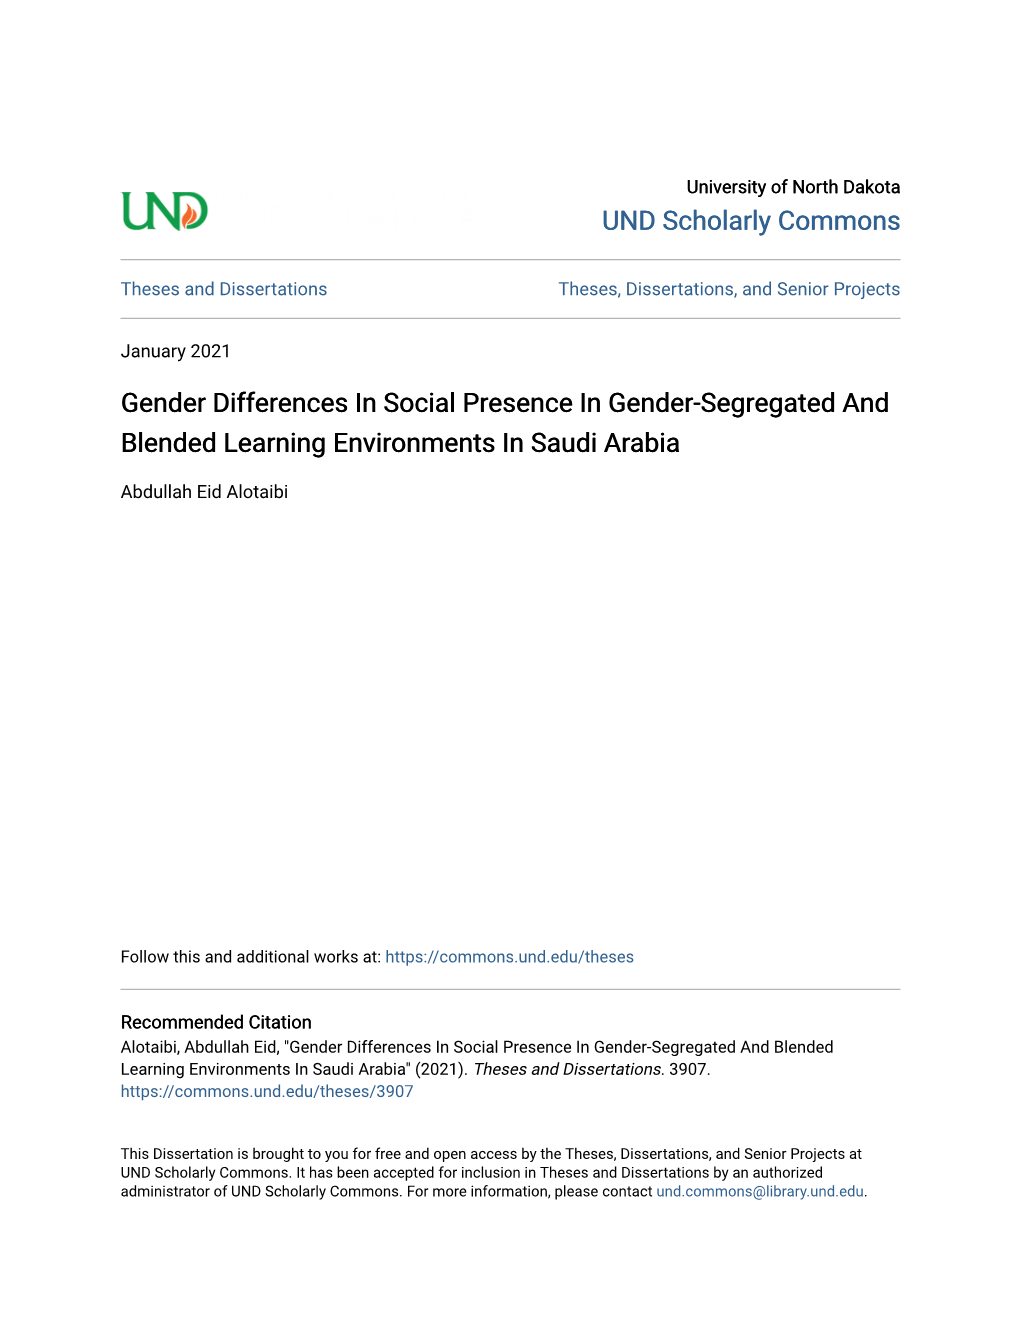 Gender Differences in Social Presence in Gender-Segregated and Blended Learning Environments in Saudi Arabia